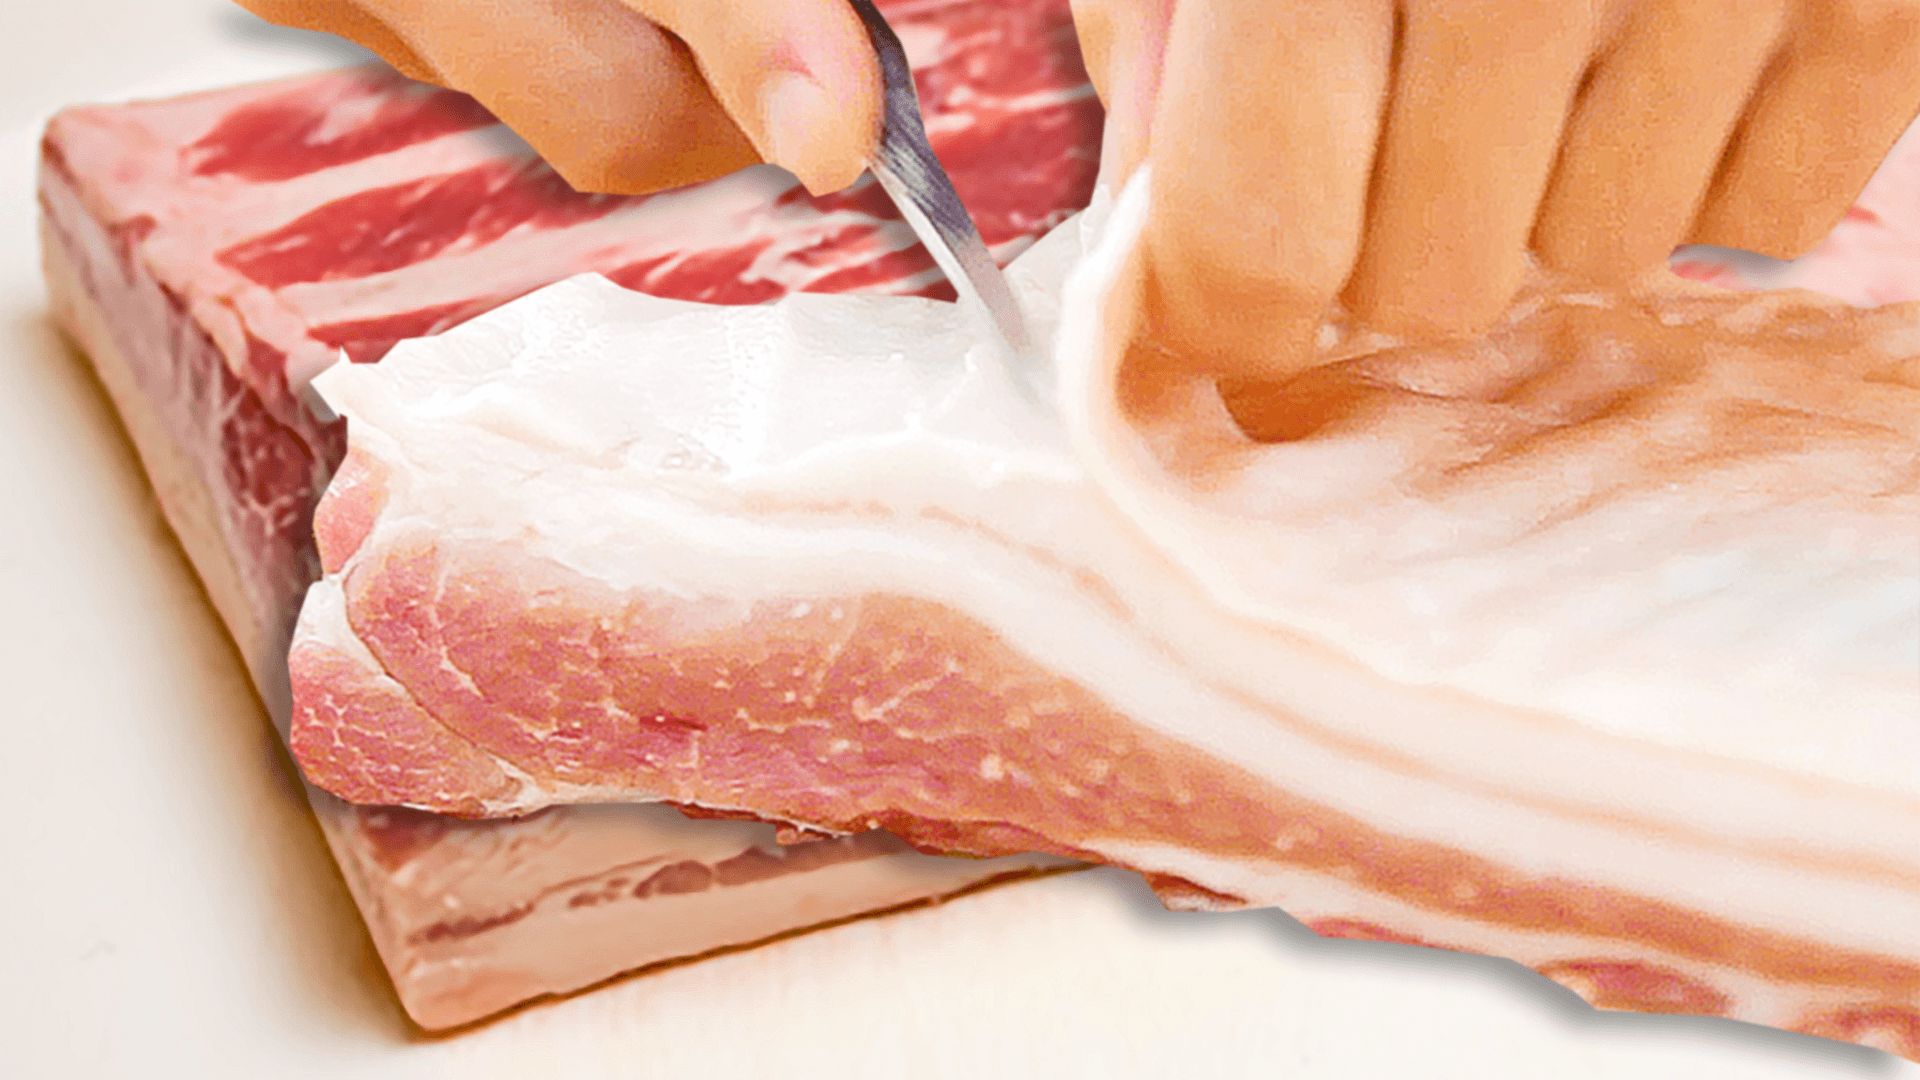 How To Cut The Skin From Pork Belly Or Brisket Pork Belly Recipe In 4 Steps